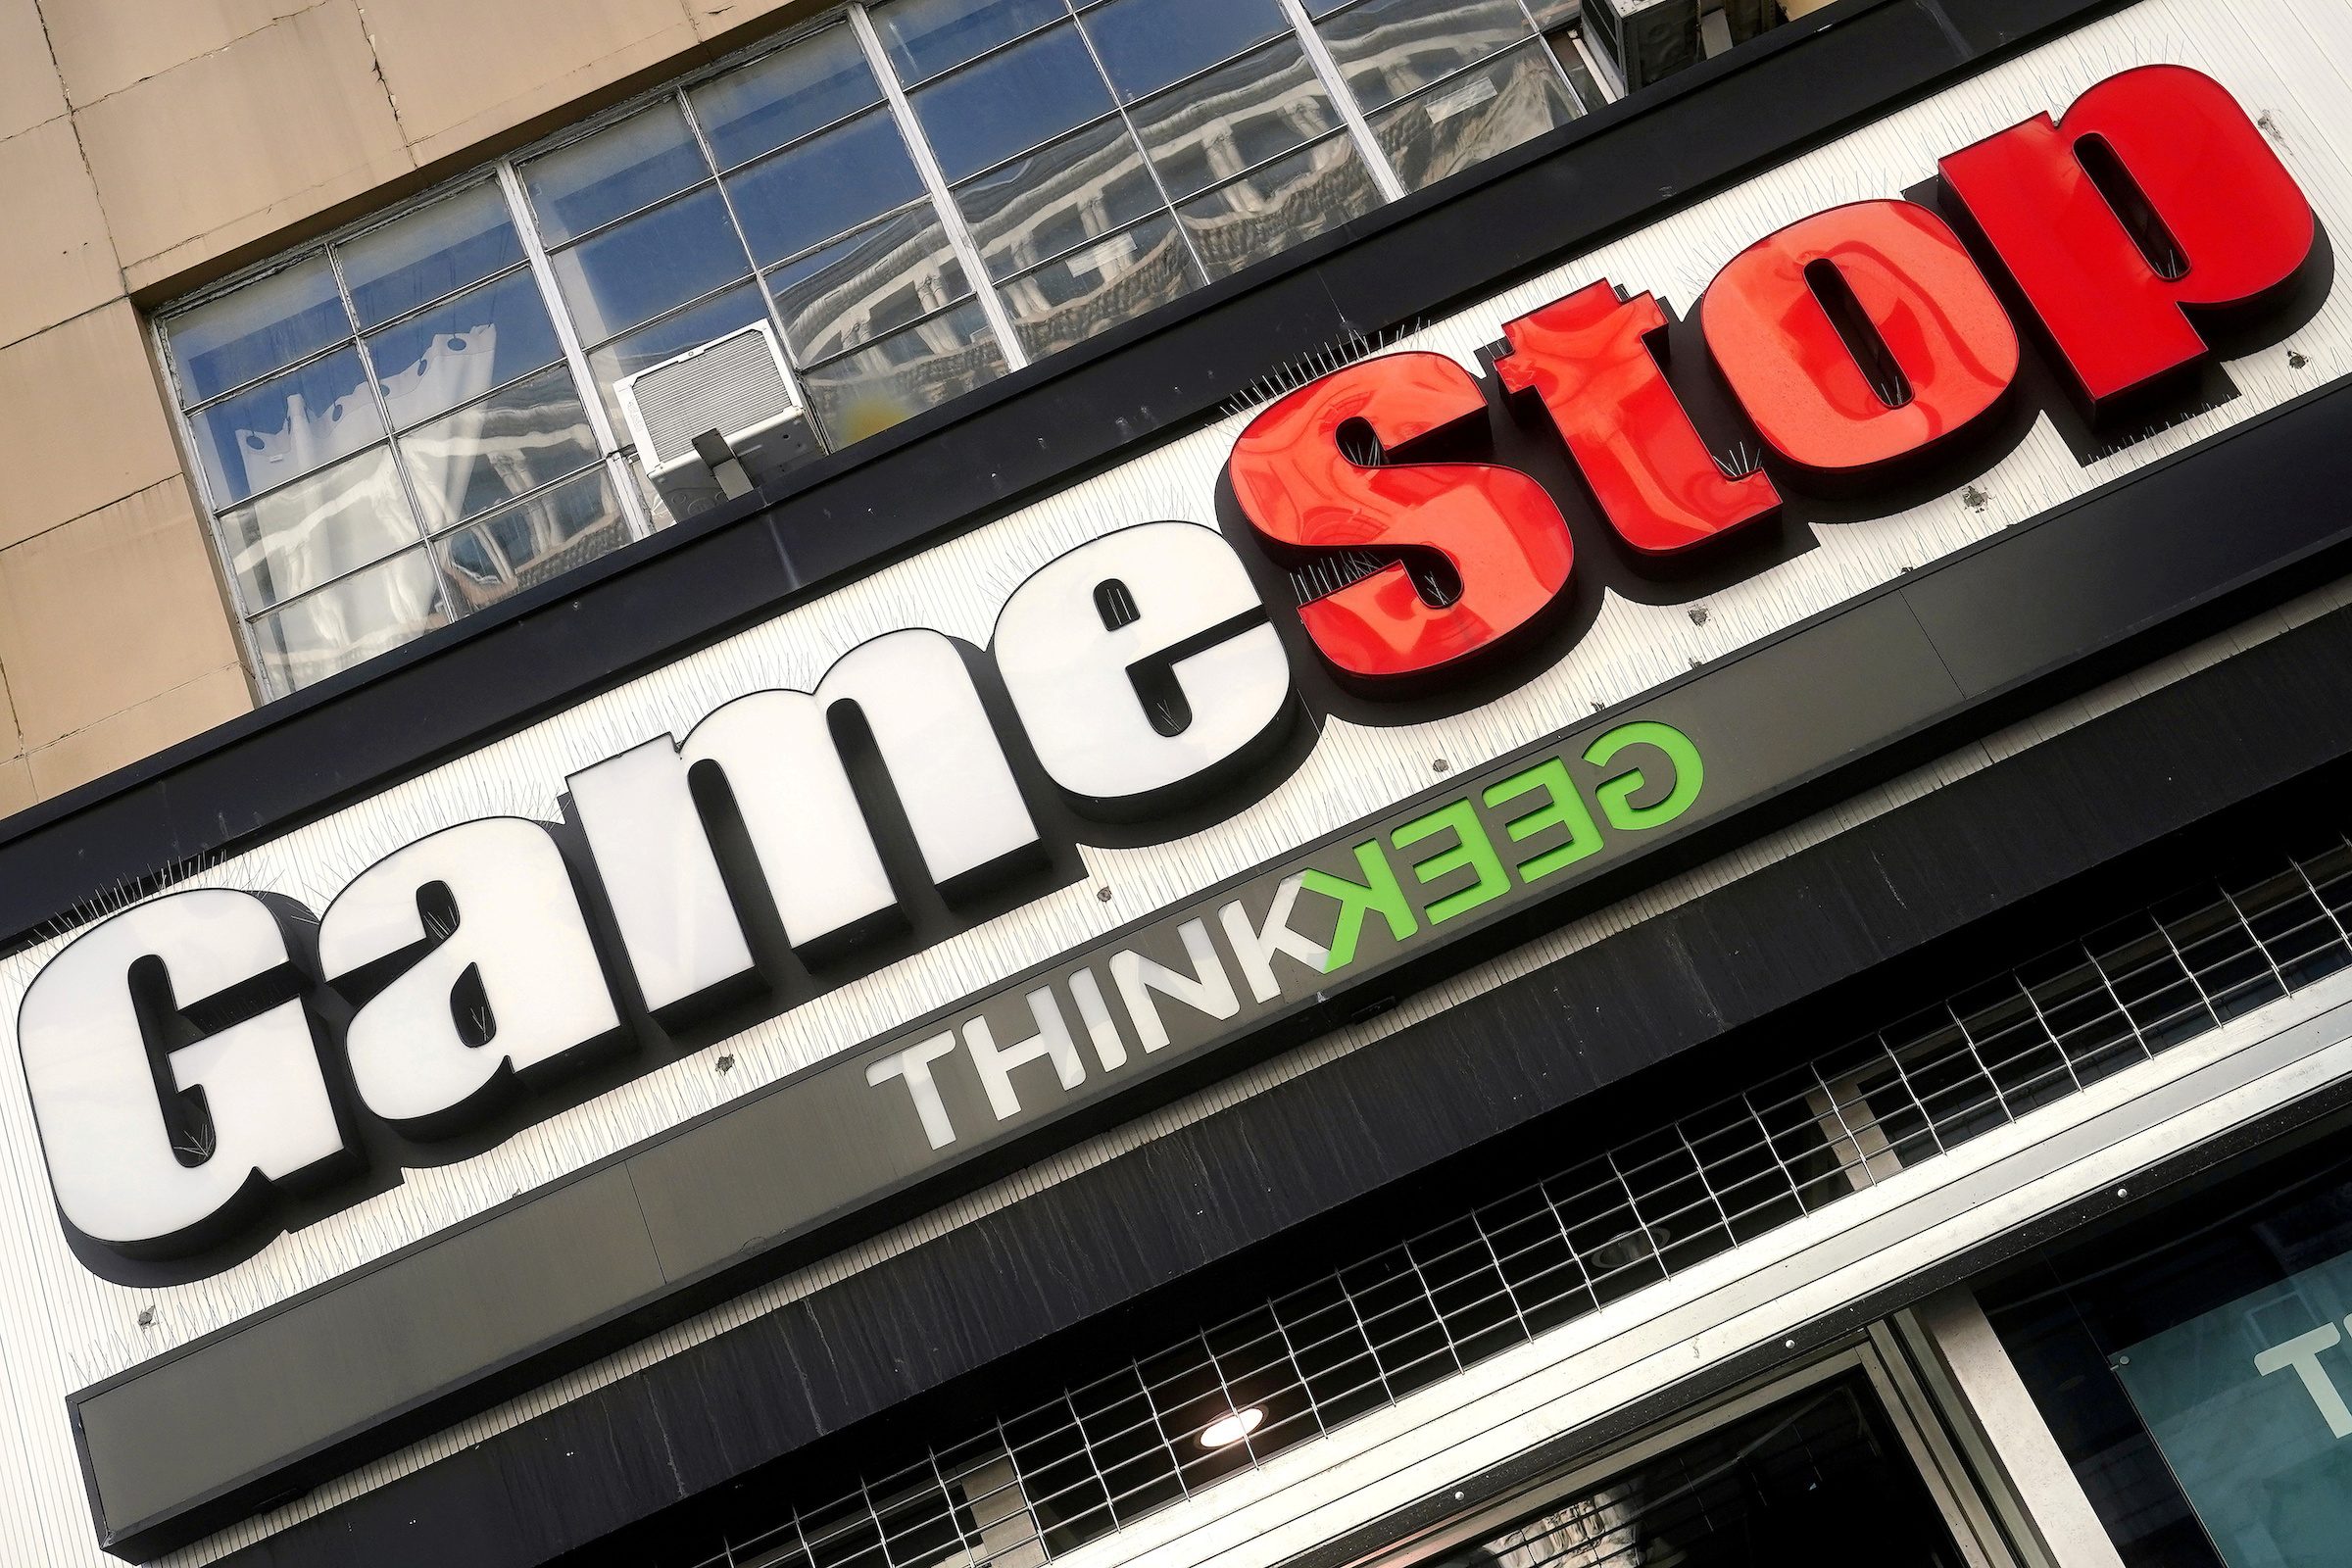 YouTube streamer Roaring Kitty to testify on GameStop alongside hedge fund managers